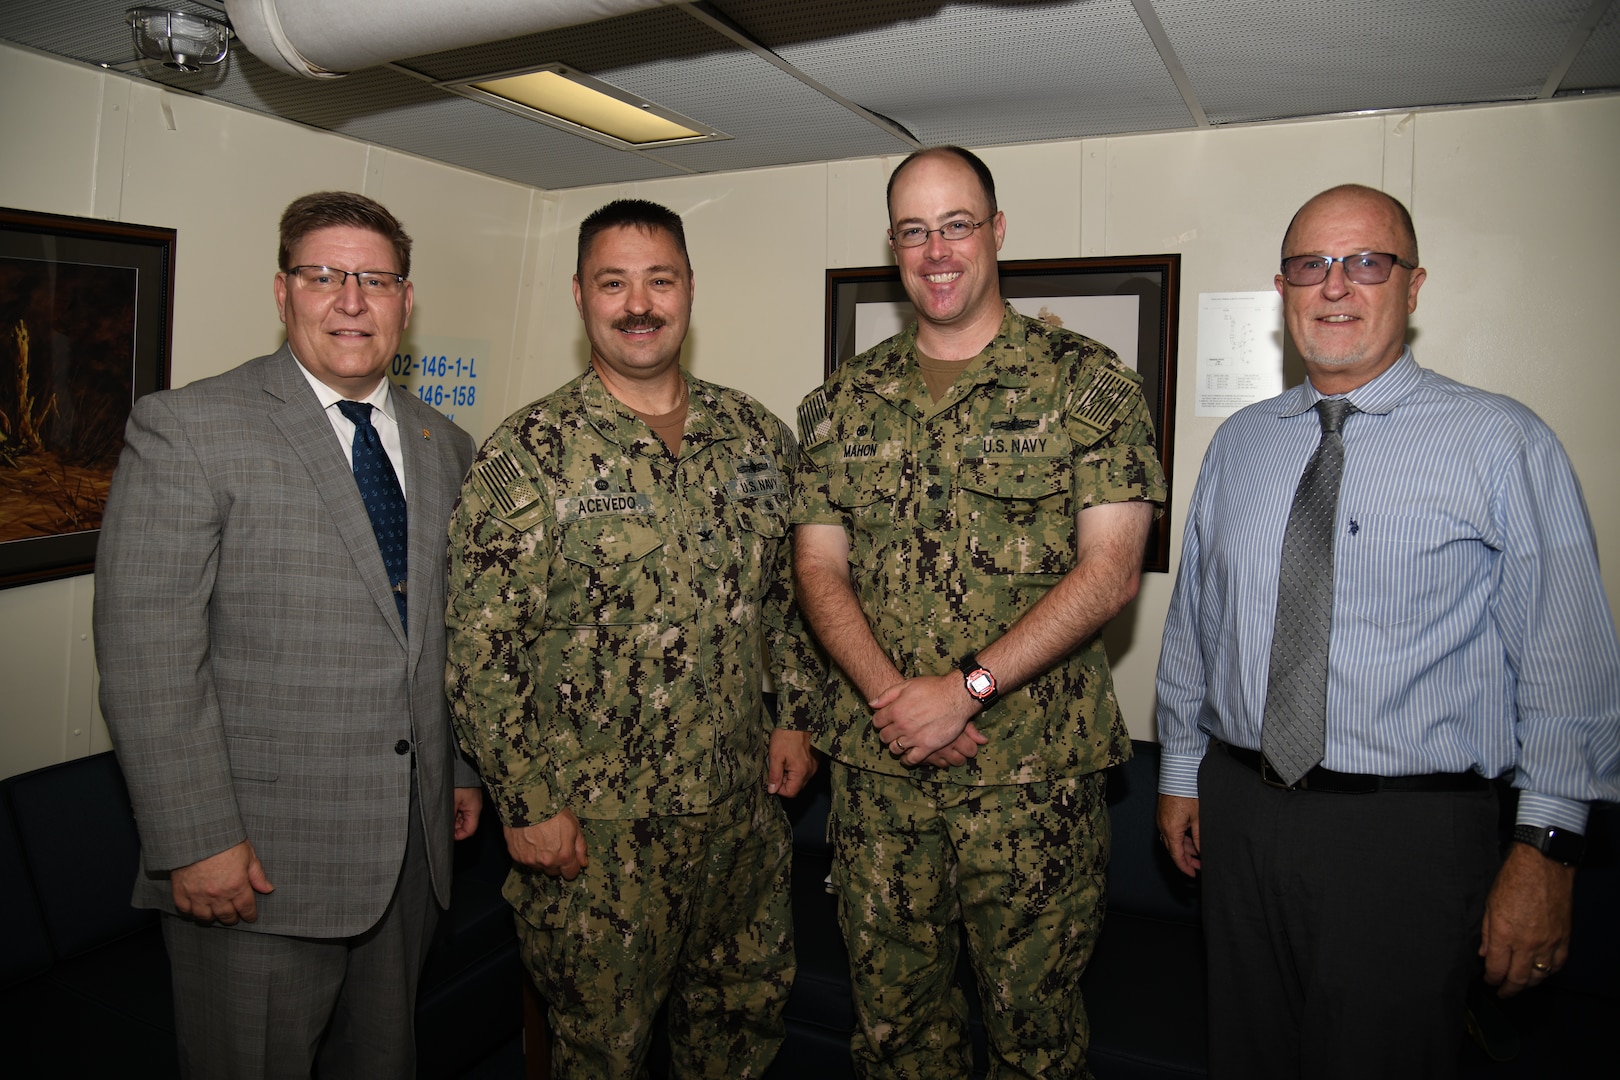 NSWC PHD Commanding Officer Capt. Ray Acevedo, Technical Director Paul Mann, and Deputy Technical Director Vance Brahosky pose for a photo with USS Ralph Johnson (DDG 114) Commanding Officer Cmdr. Casey Mahon during a meet and greet aboard the ship, Aug. 26.